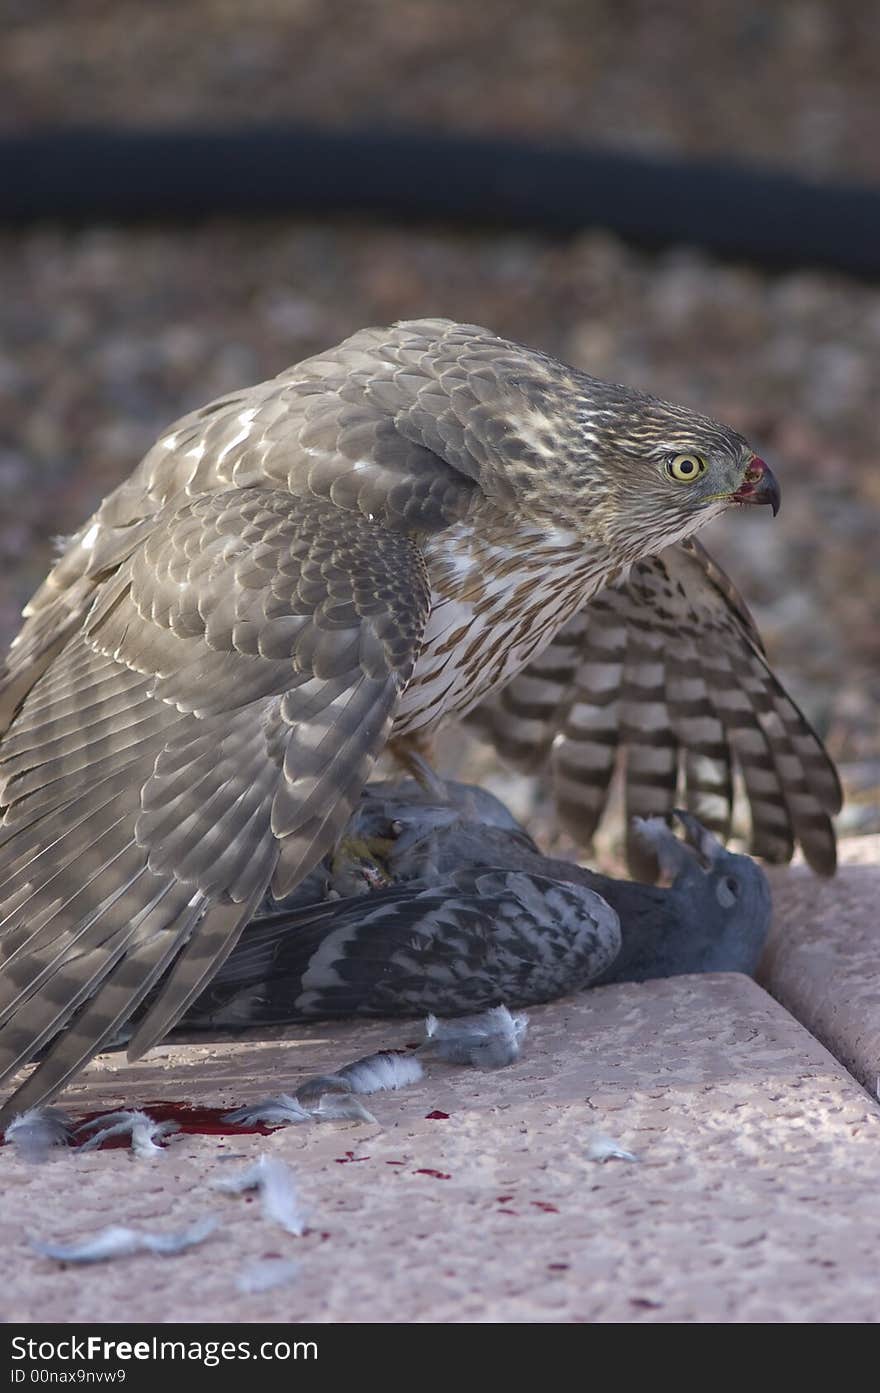 Photograph of a bird of prey eating pigeon. Photograph of a bird of prey eating pigeon.